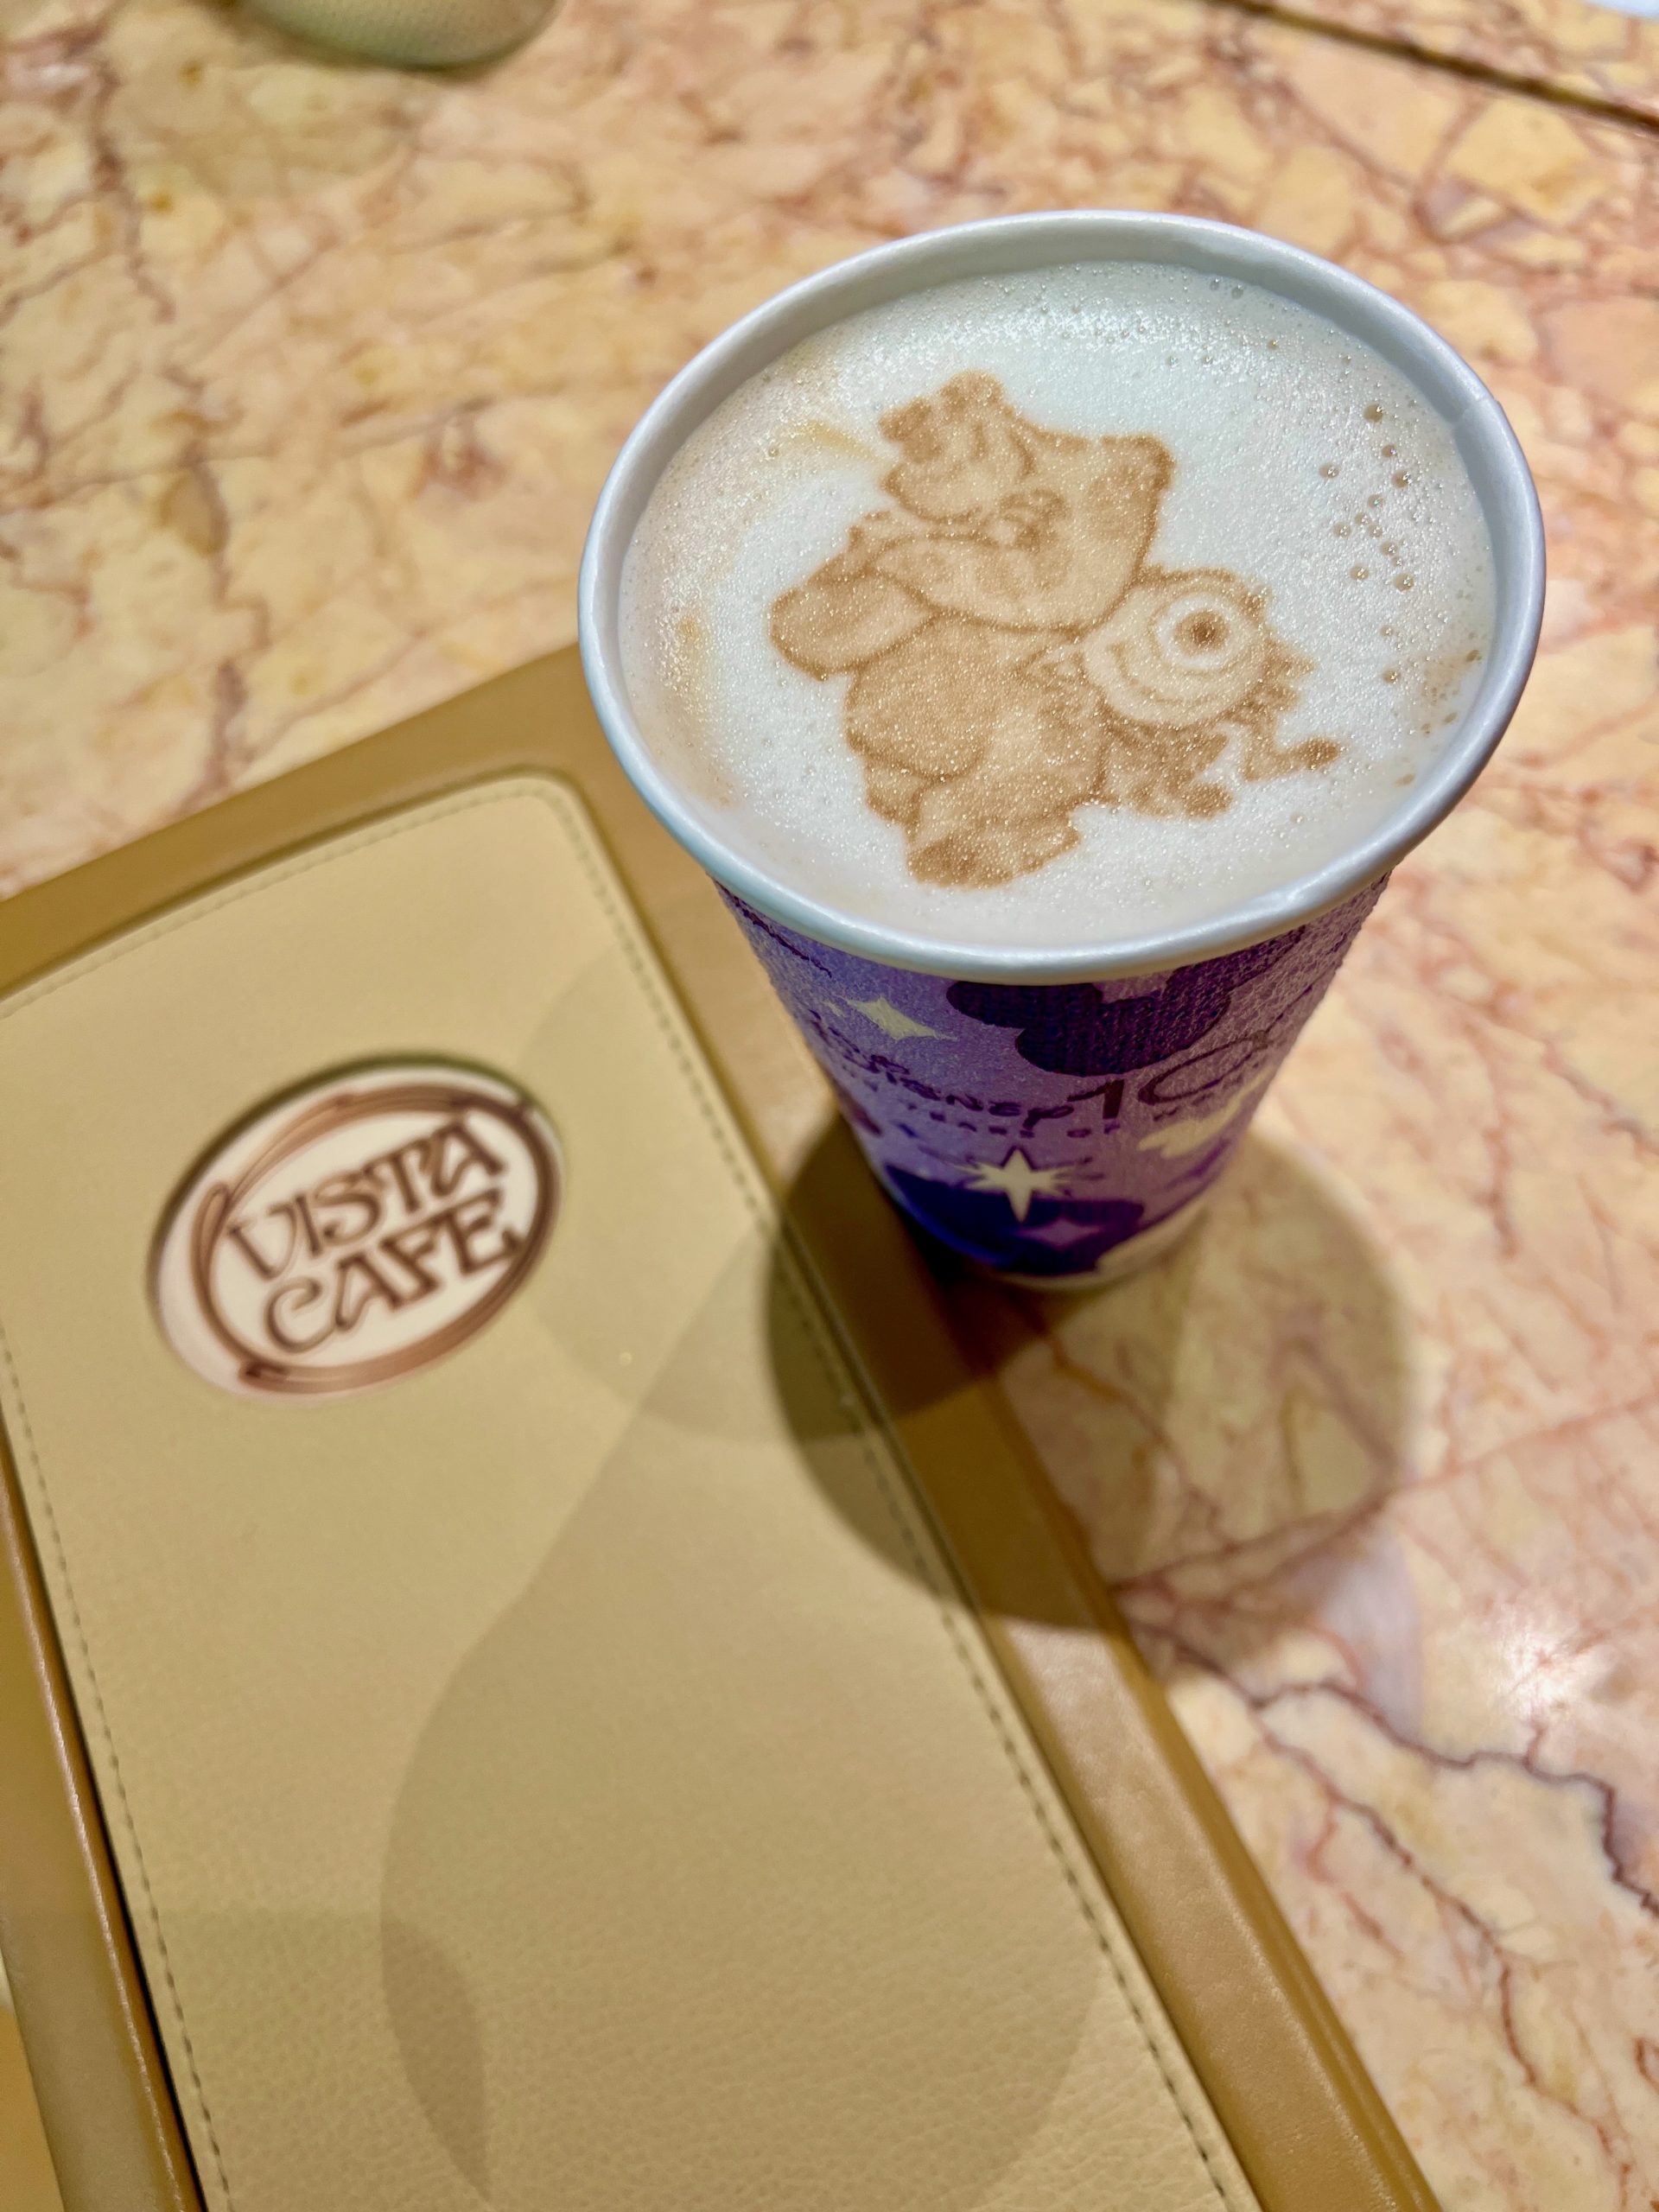 Mike and Sulley Latte Disney Fantasy Cove Cafe